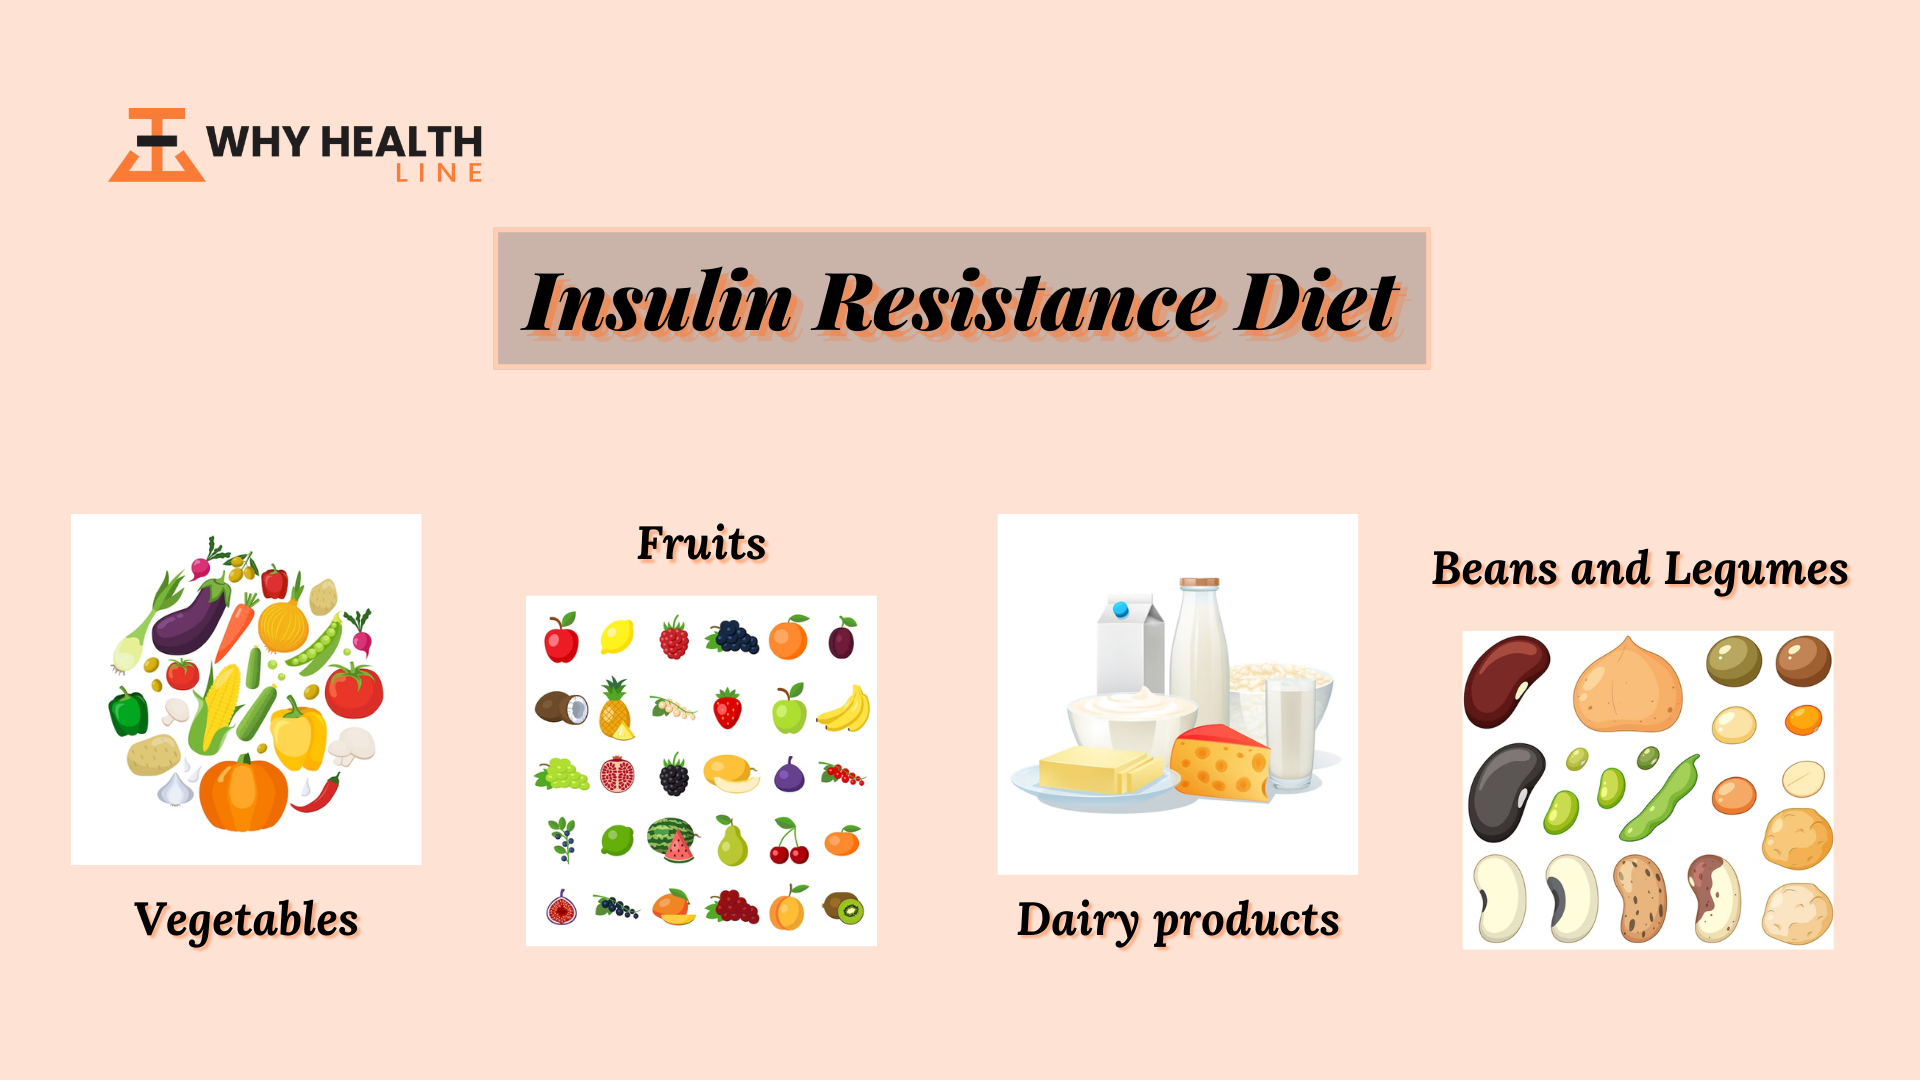 Insulin Resistance Diet: Foods to Eat and Diet Tips